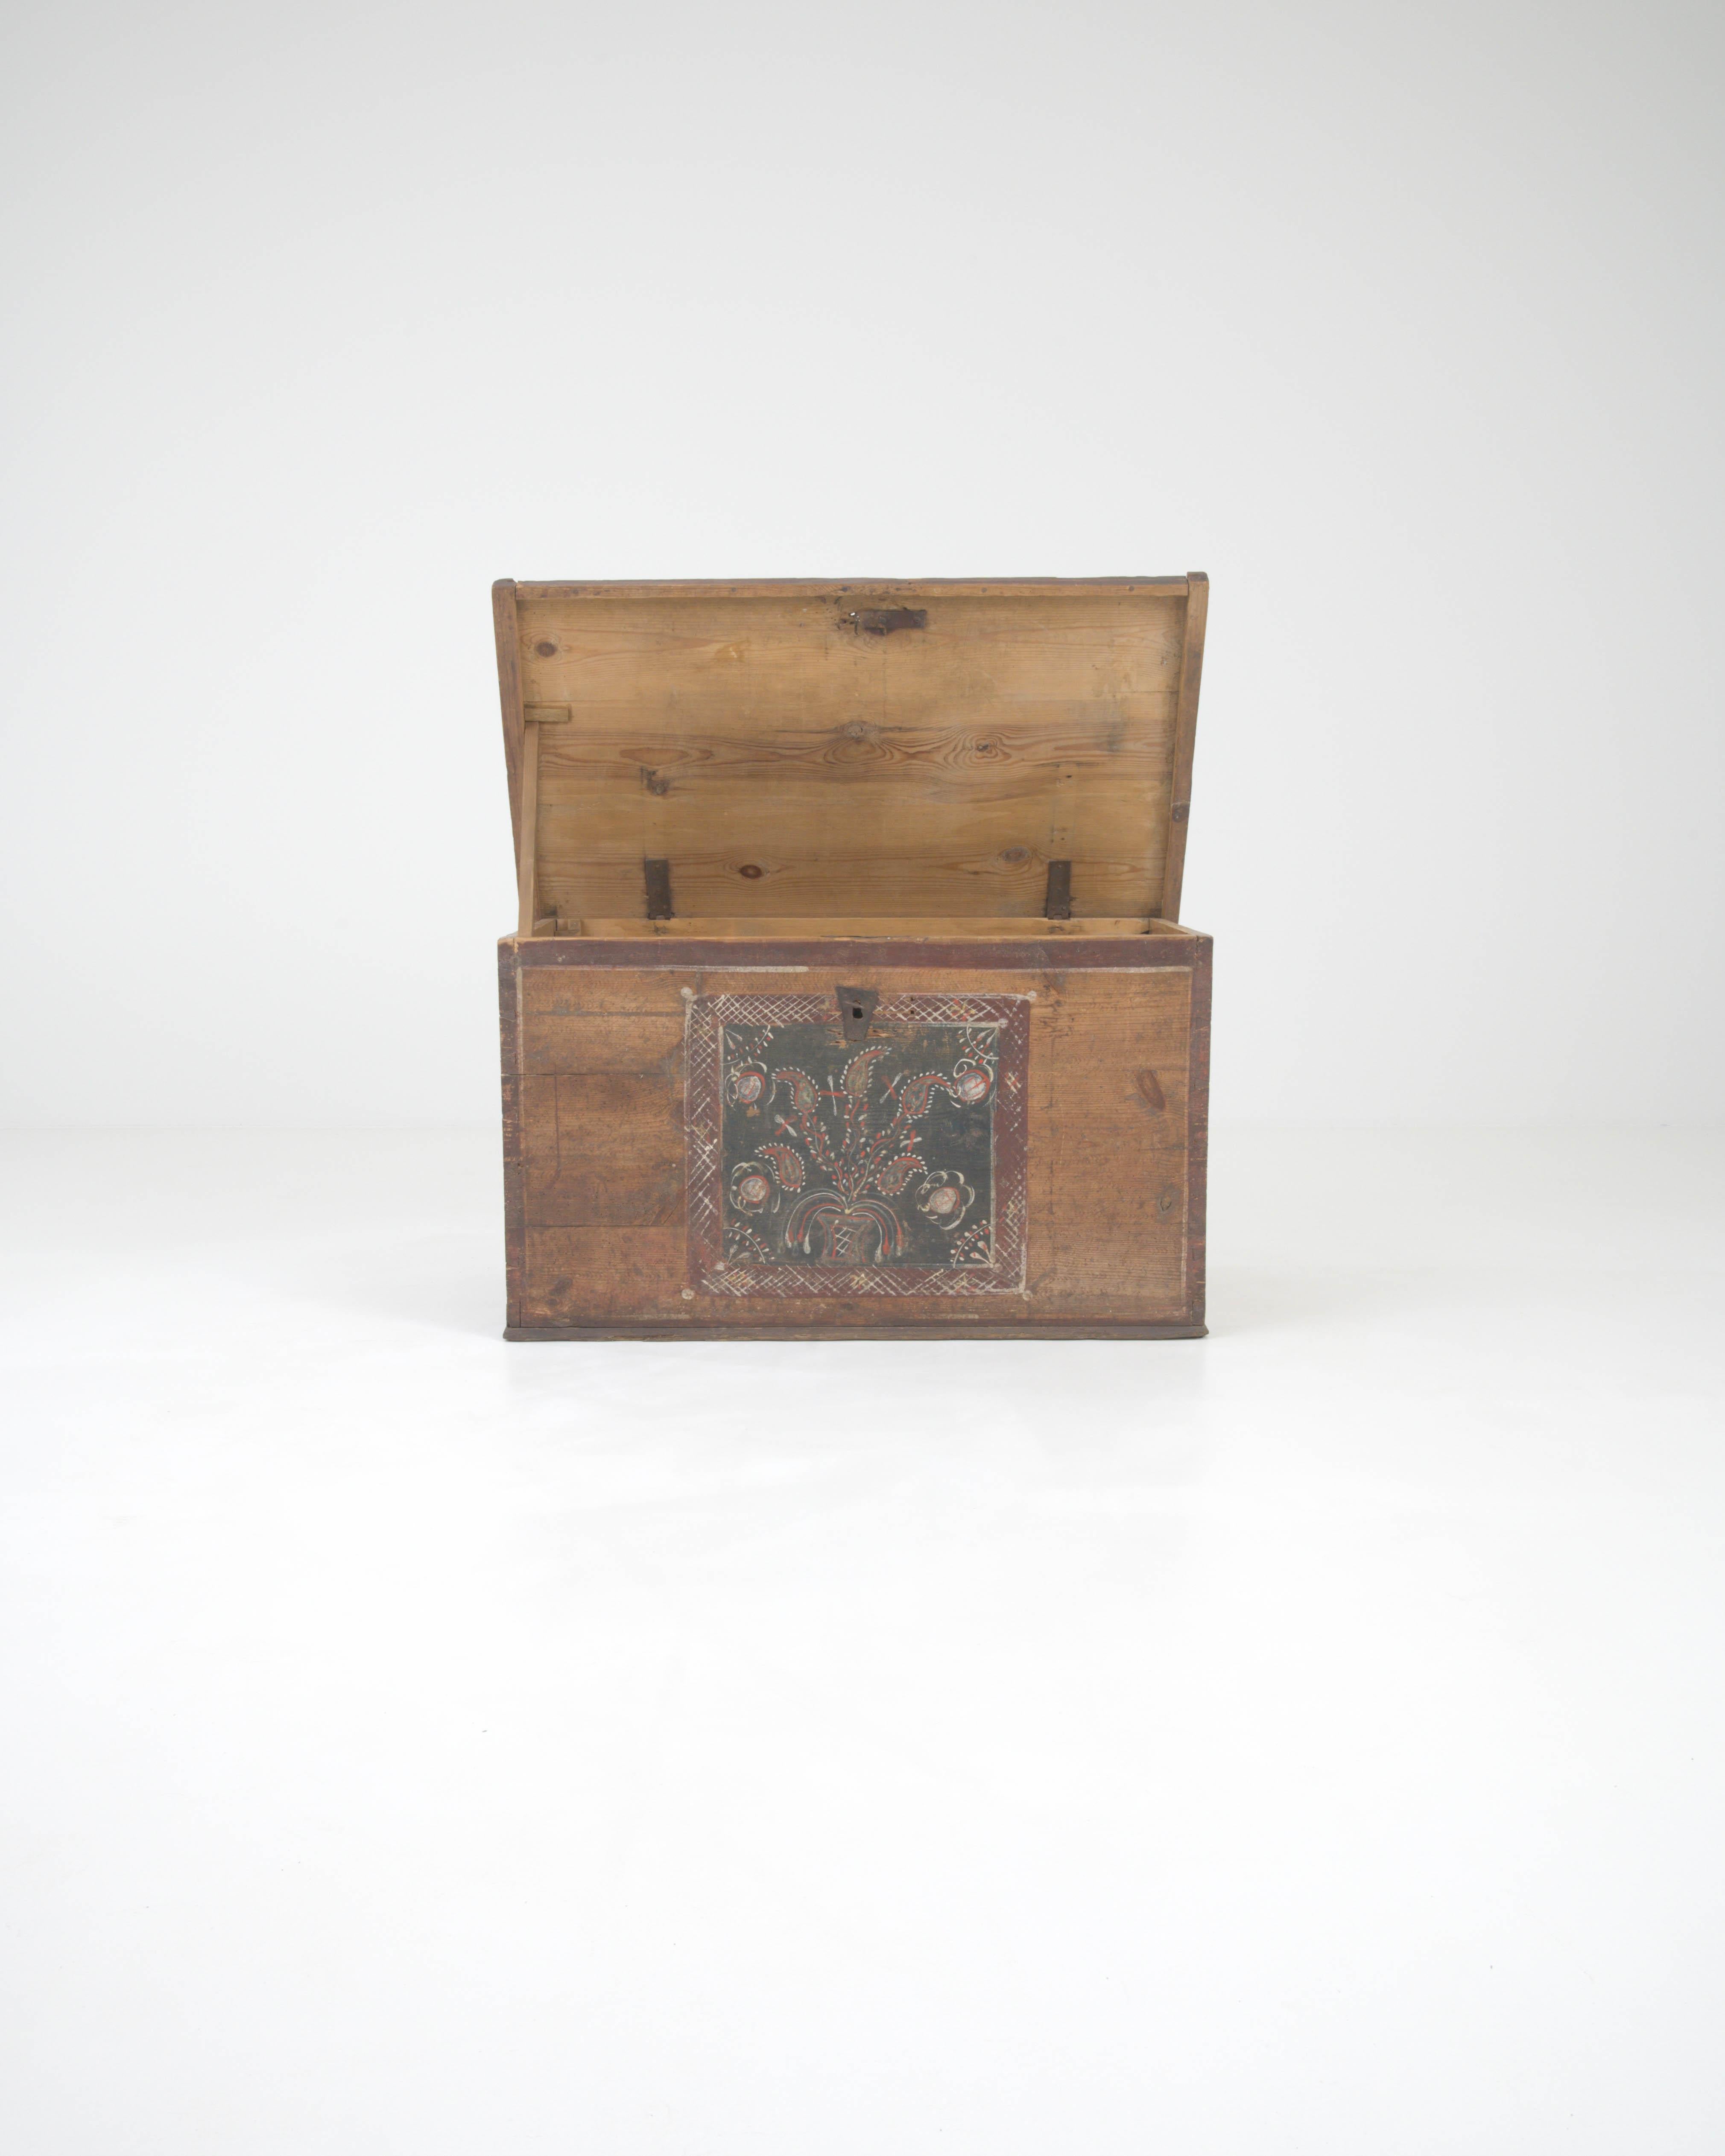 Behold a piece steeped in history—the 19th-century Central European Wooden Chest. Each corner of this venerable chest is etched with the patina of time, its surface bearing the hallmarks of countless stories. The front panel is adorned with a